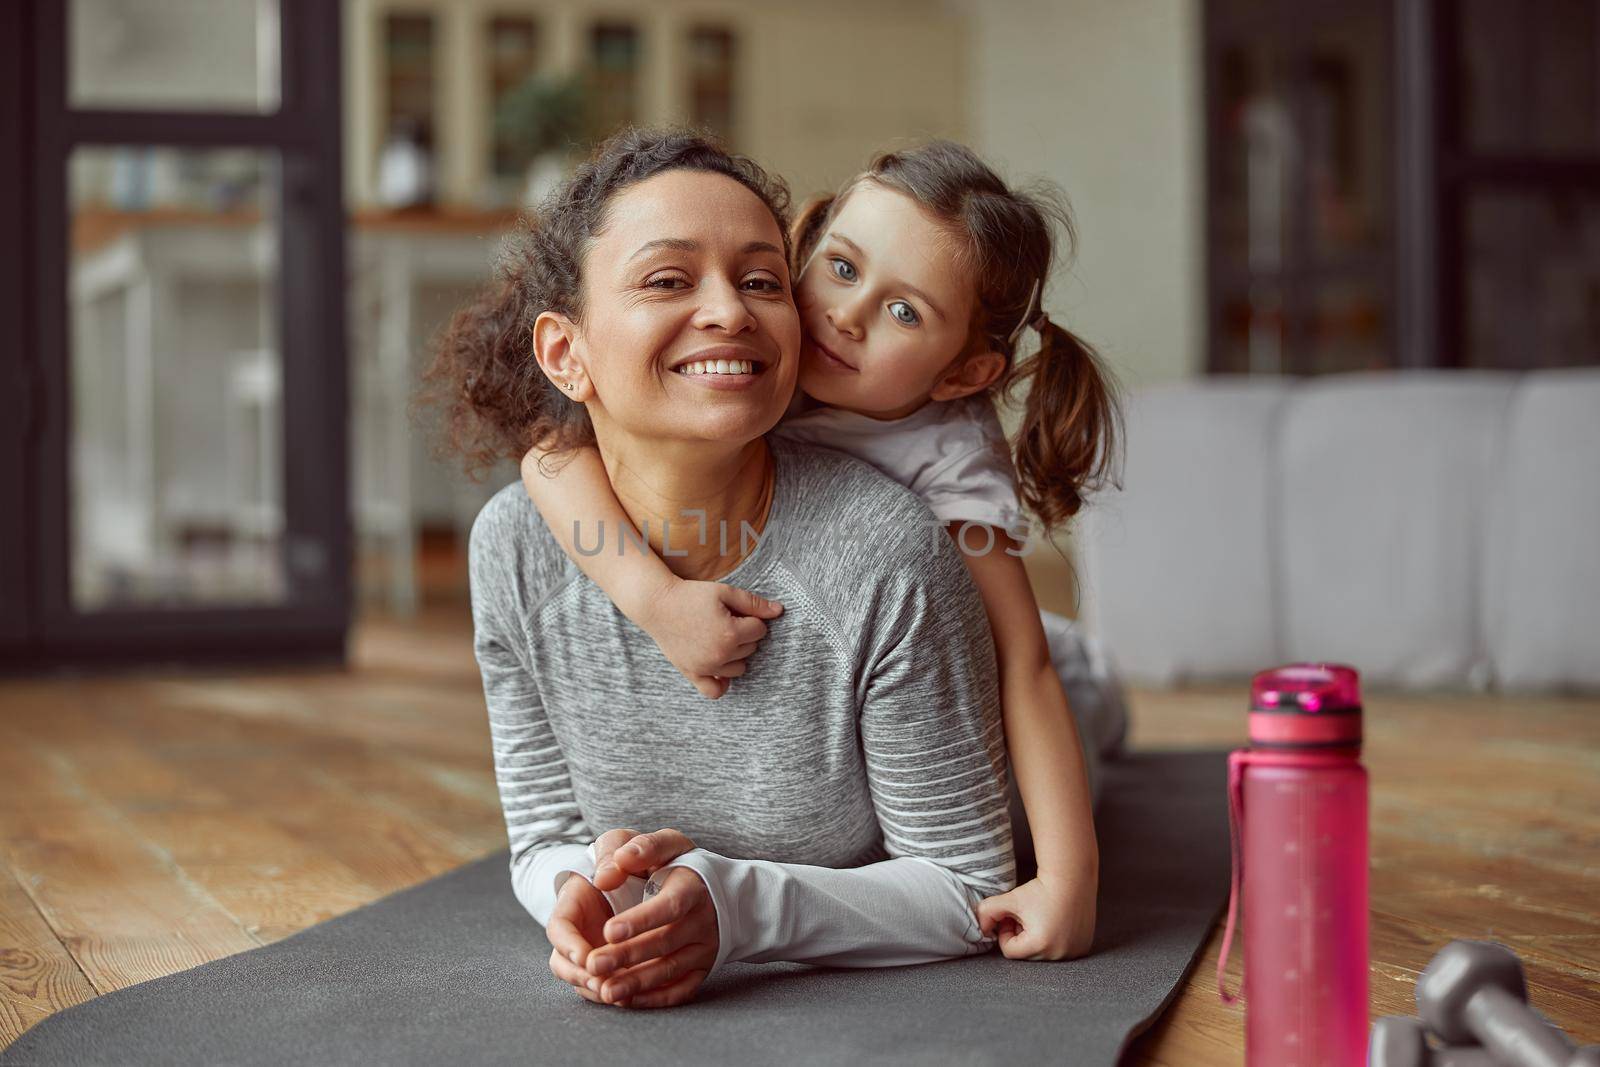 Waist up portrait of smiling girl hugging her mom while they are doing training at home